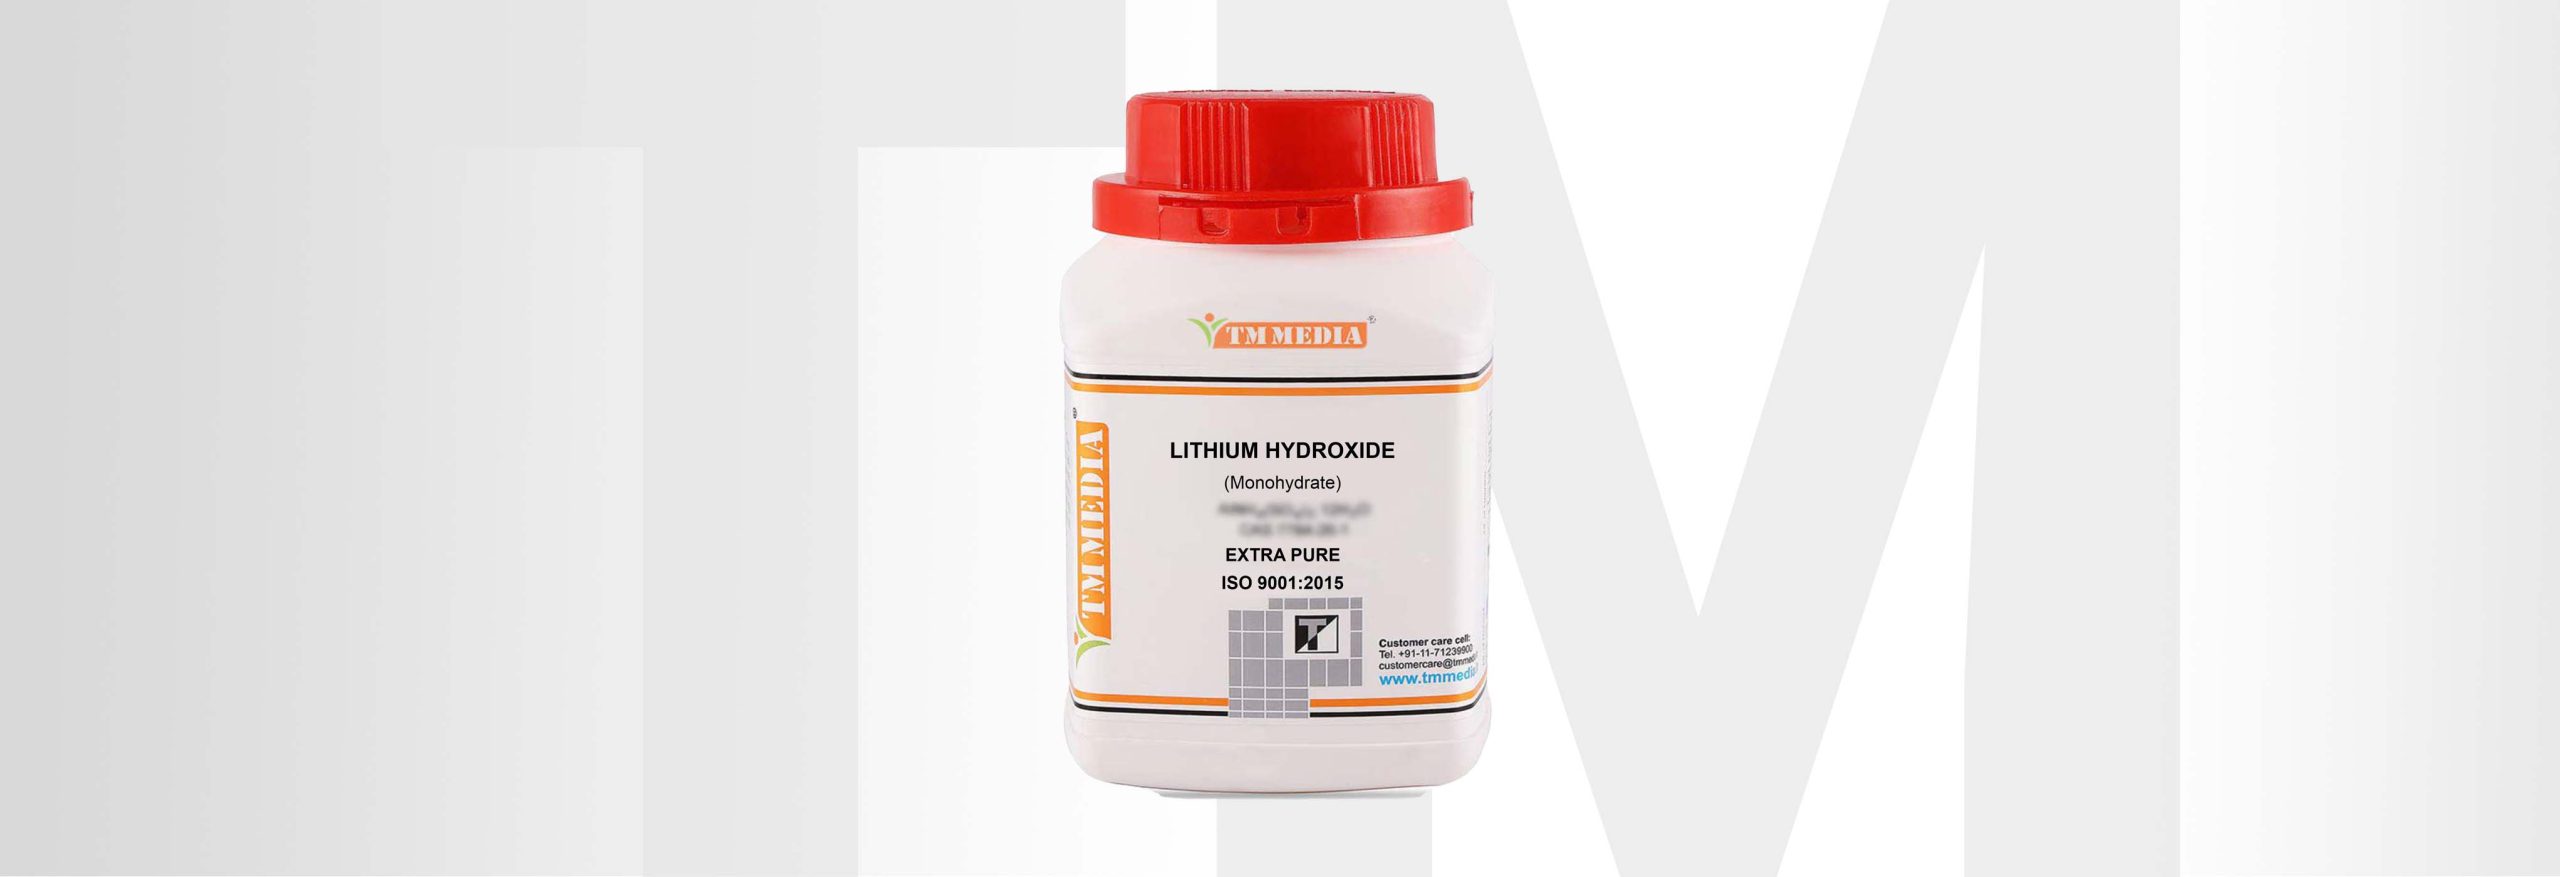 LITHIUM HYDROXIDE (Monohydrate) EXTRA PURE – TMMedia